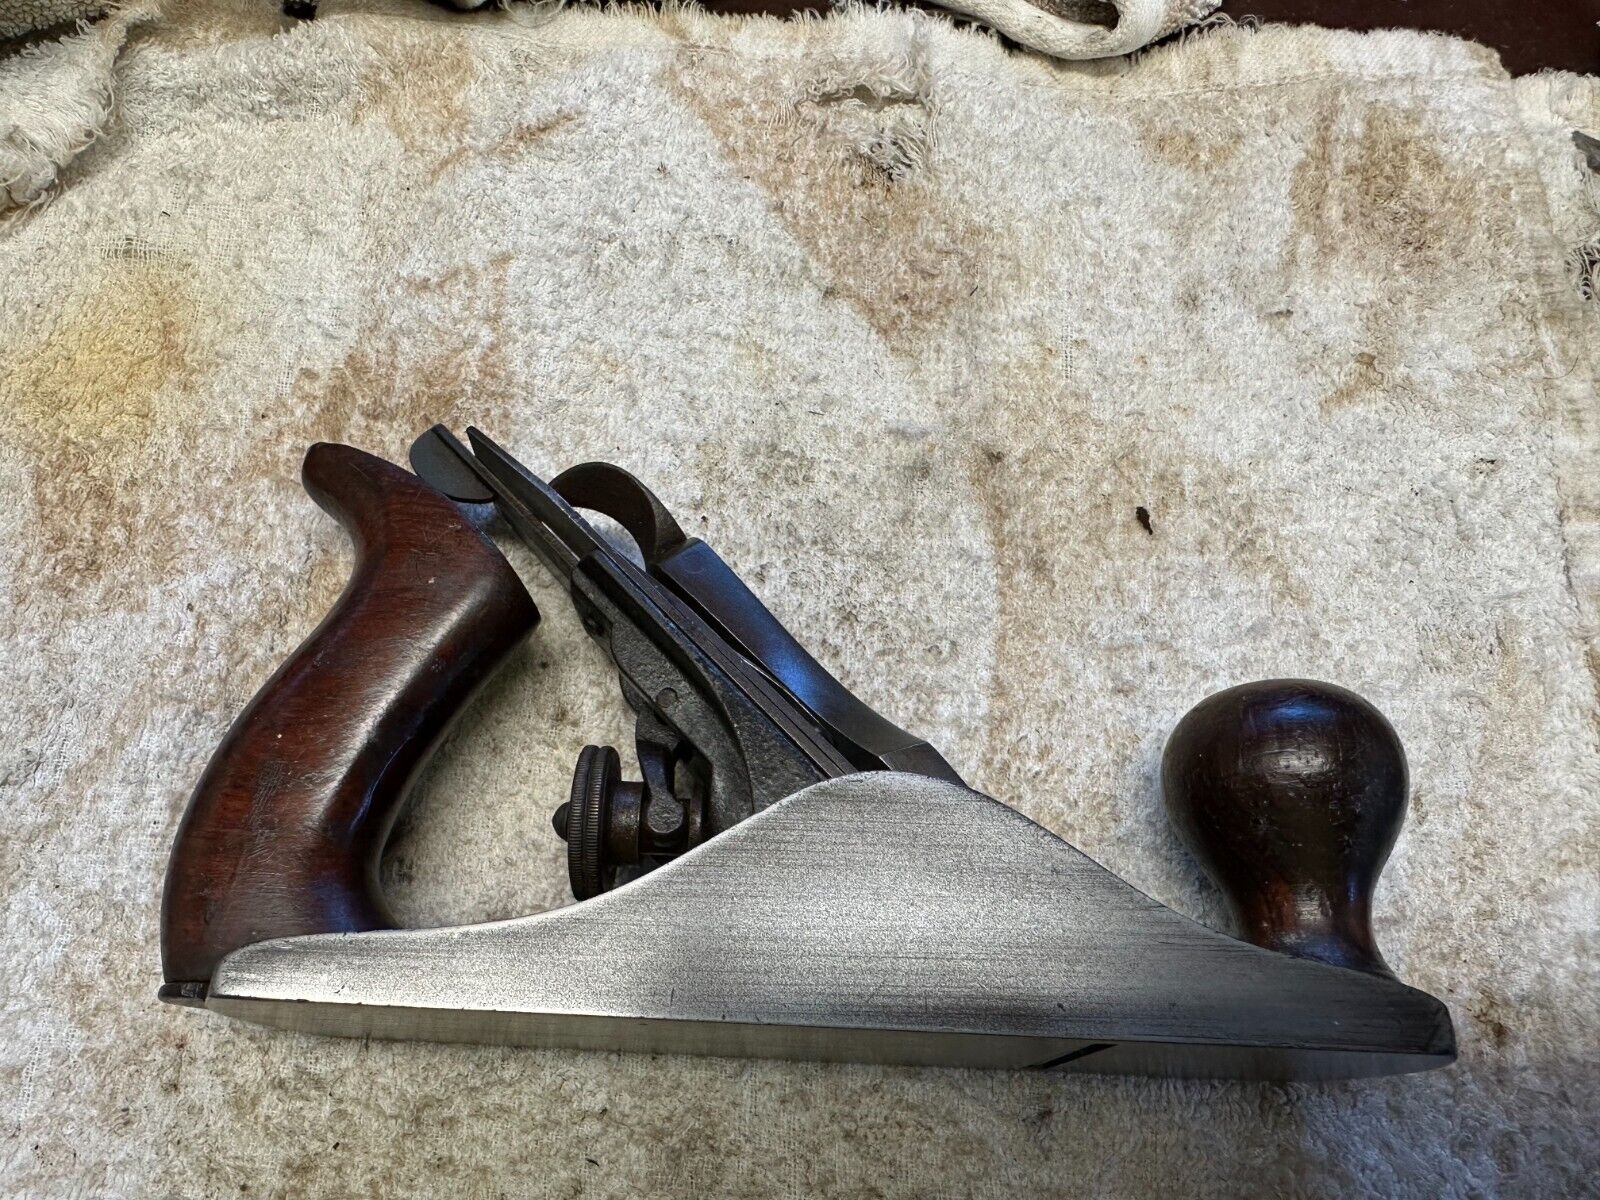 Stanley #2 Sweetheart Smoothing Plane - Made in the USA.